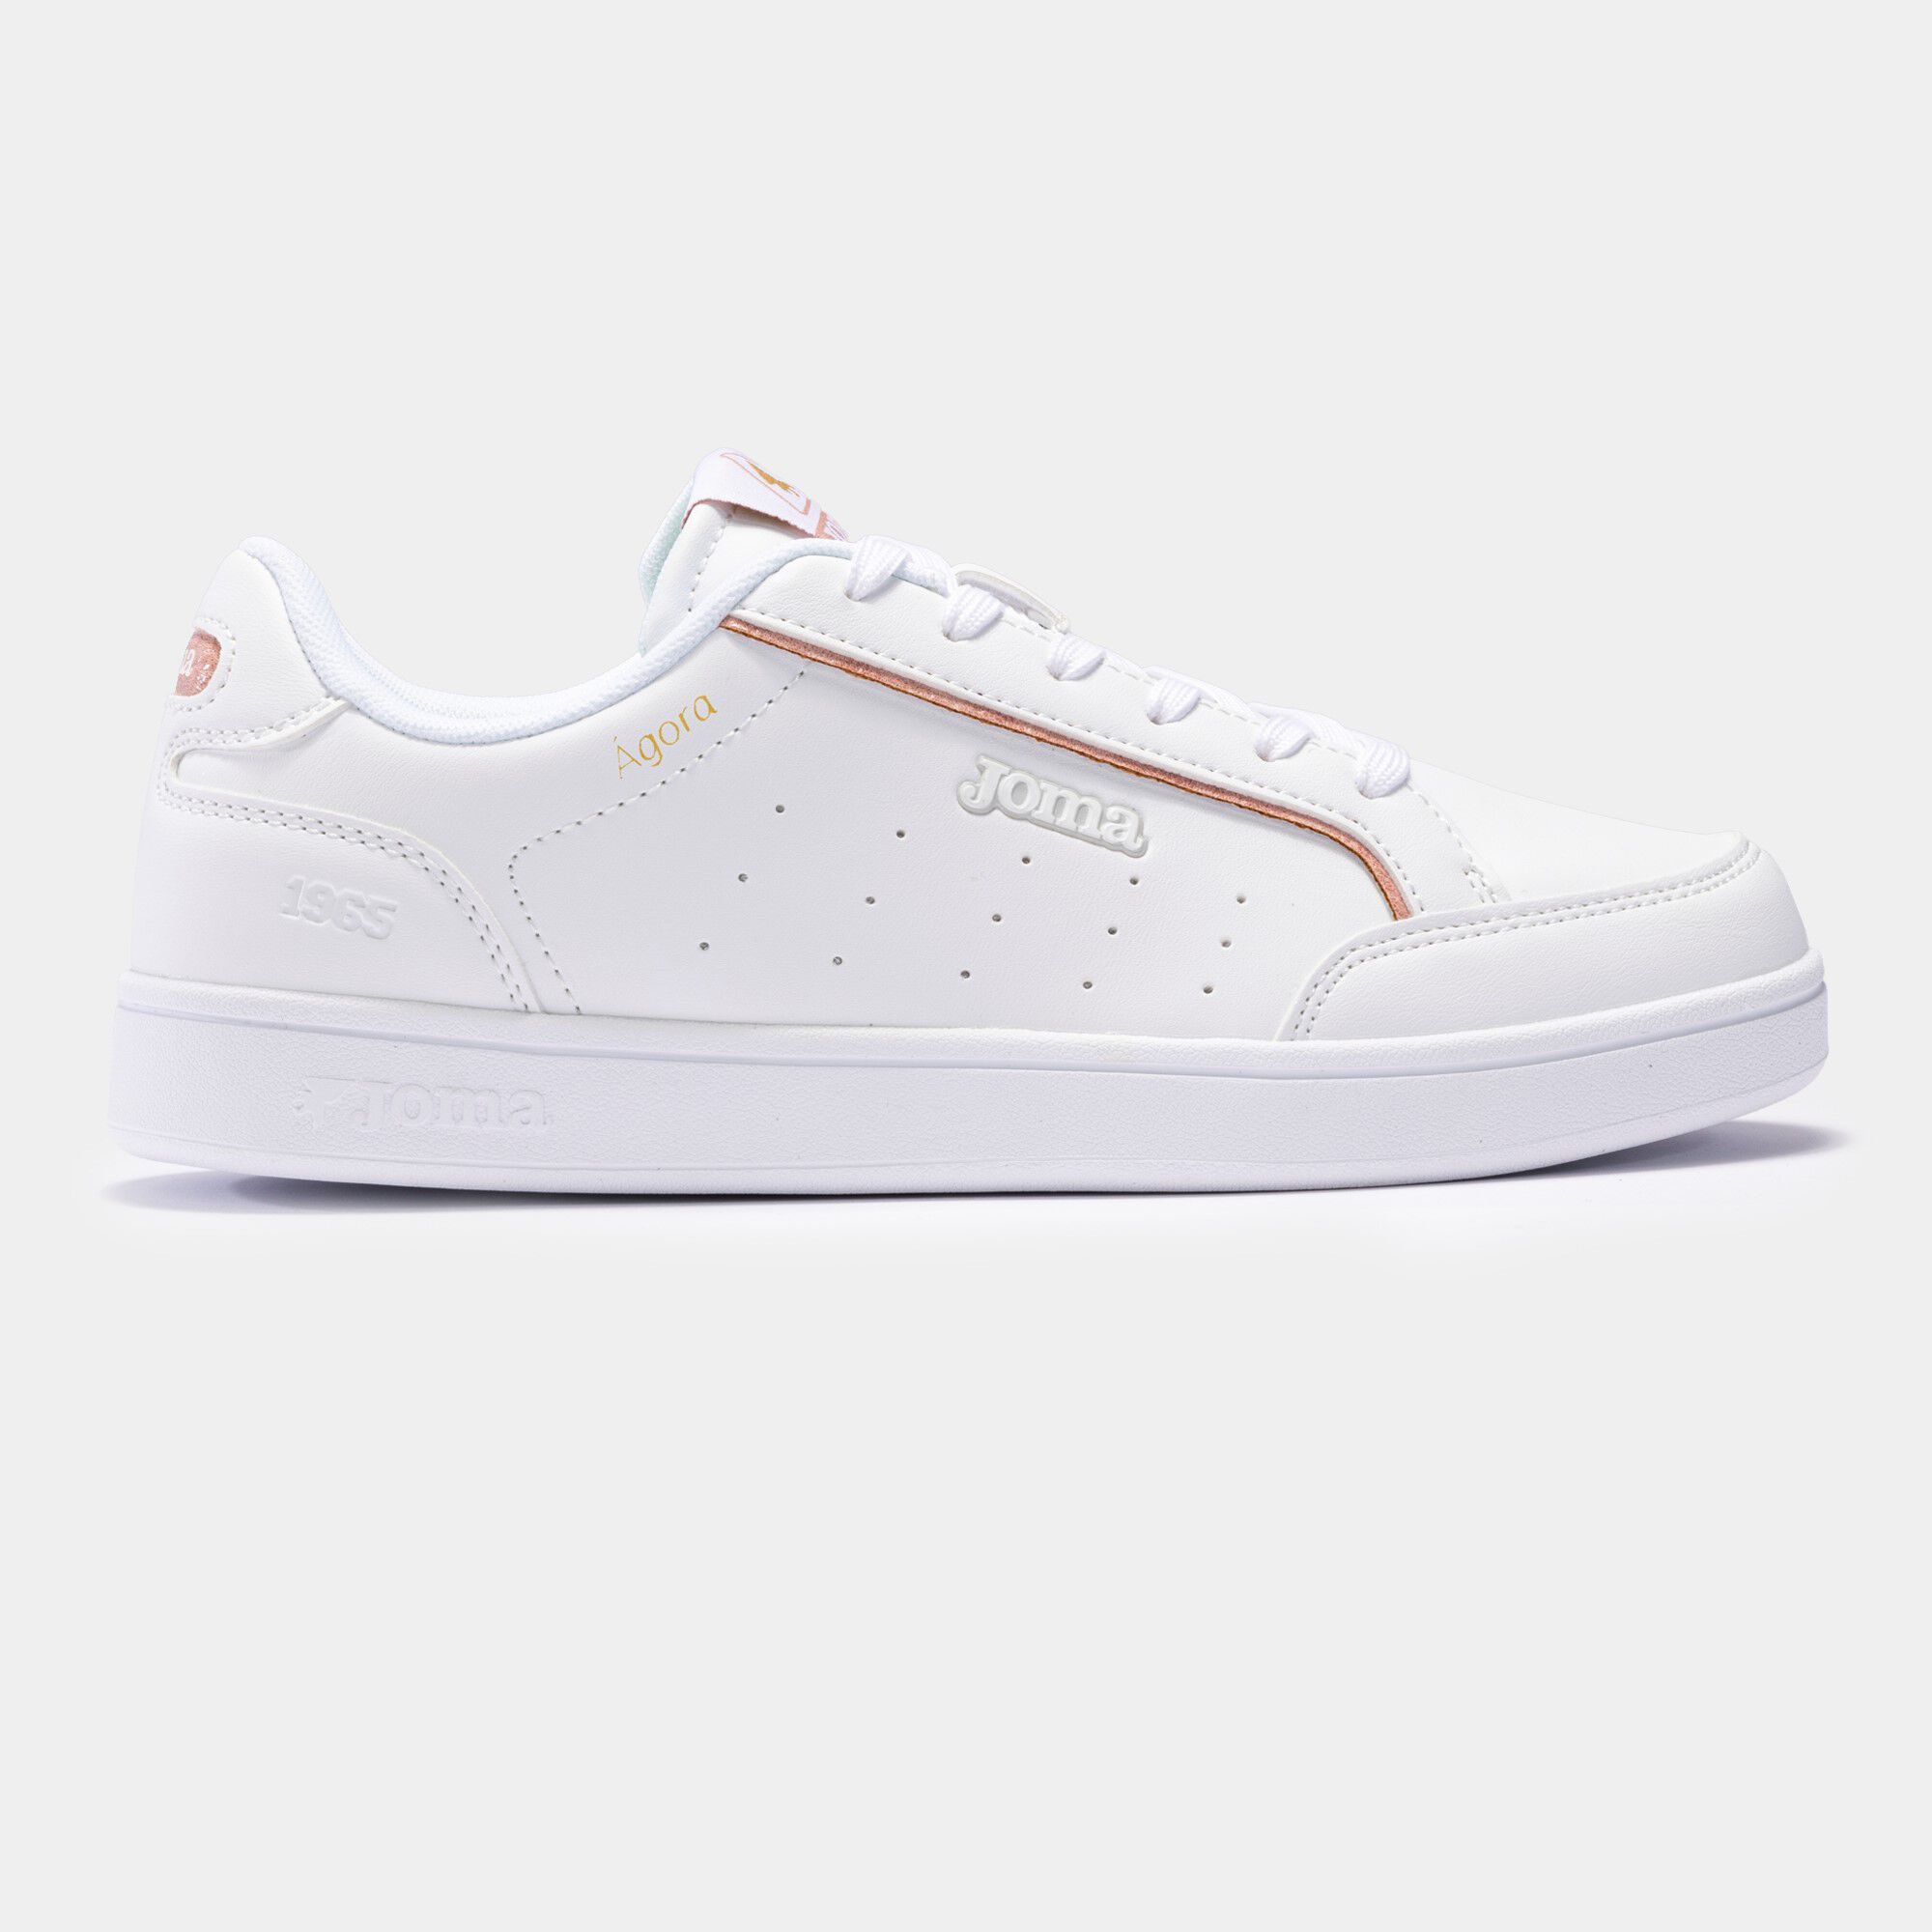 Chaussures casual C.Agora Lady 23 femme blanc rose